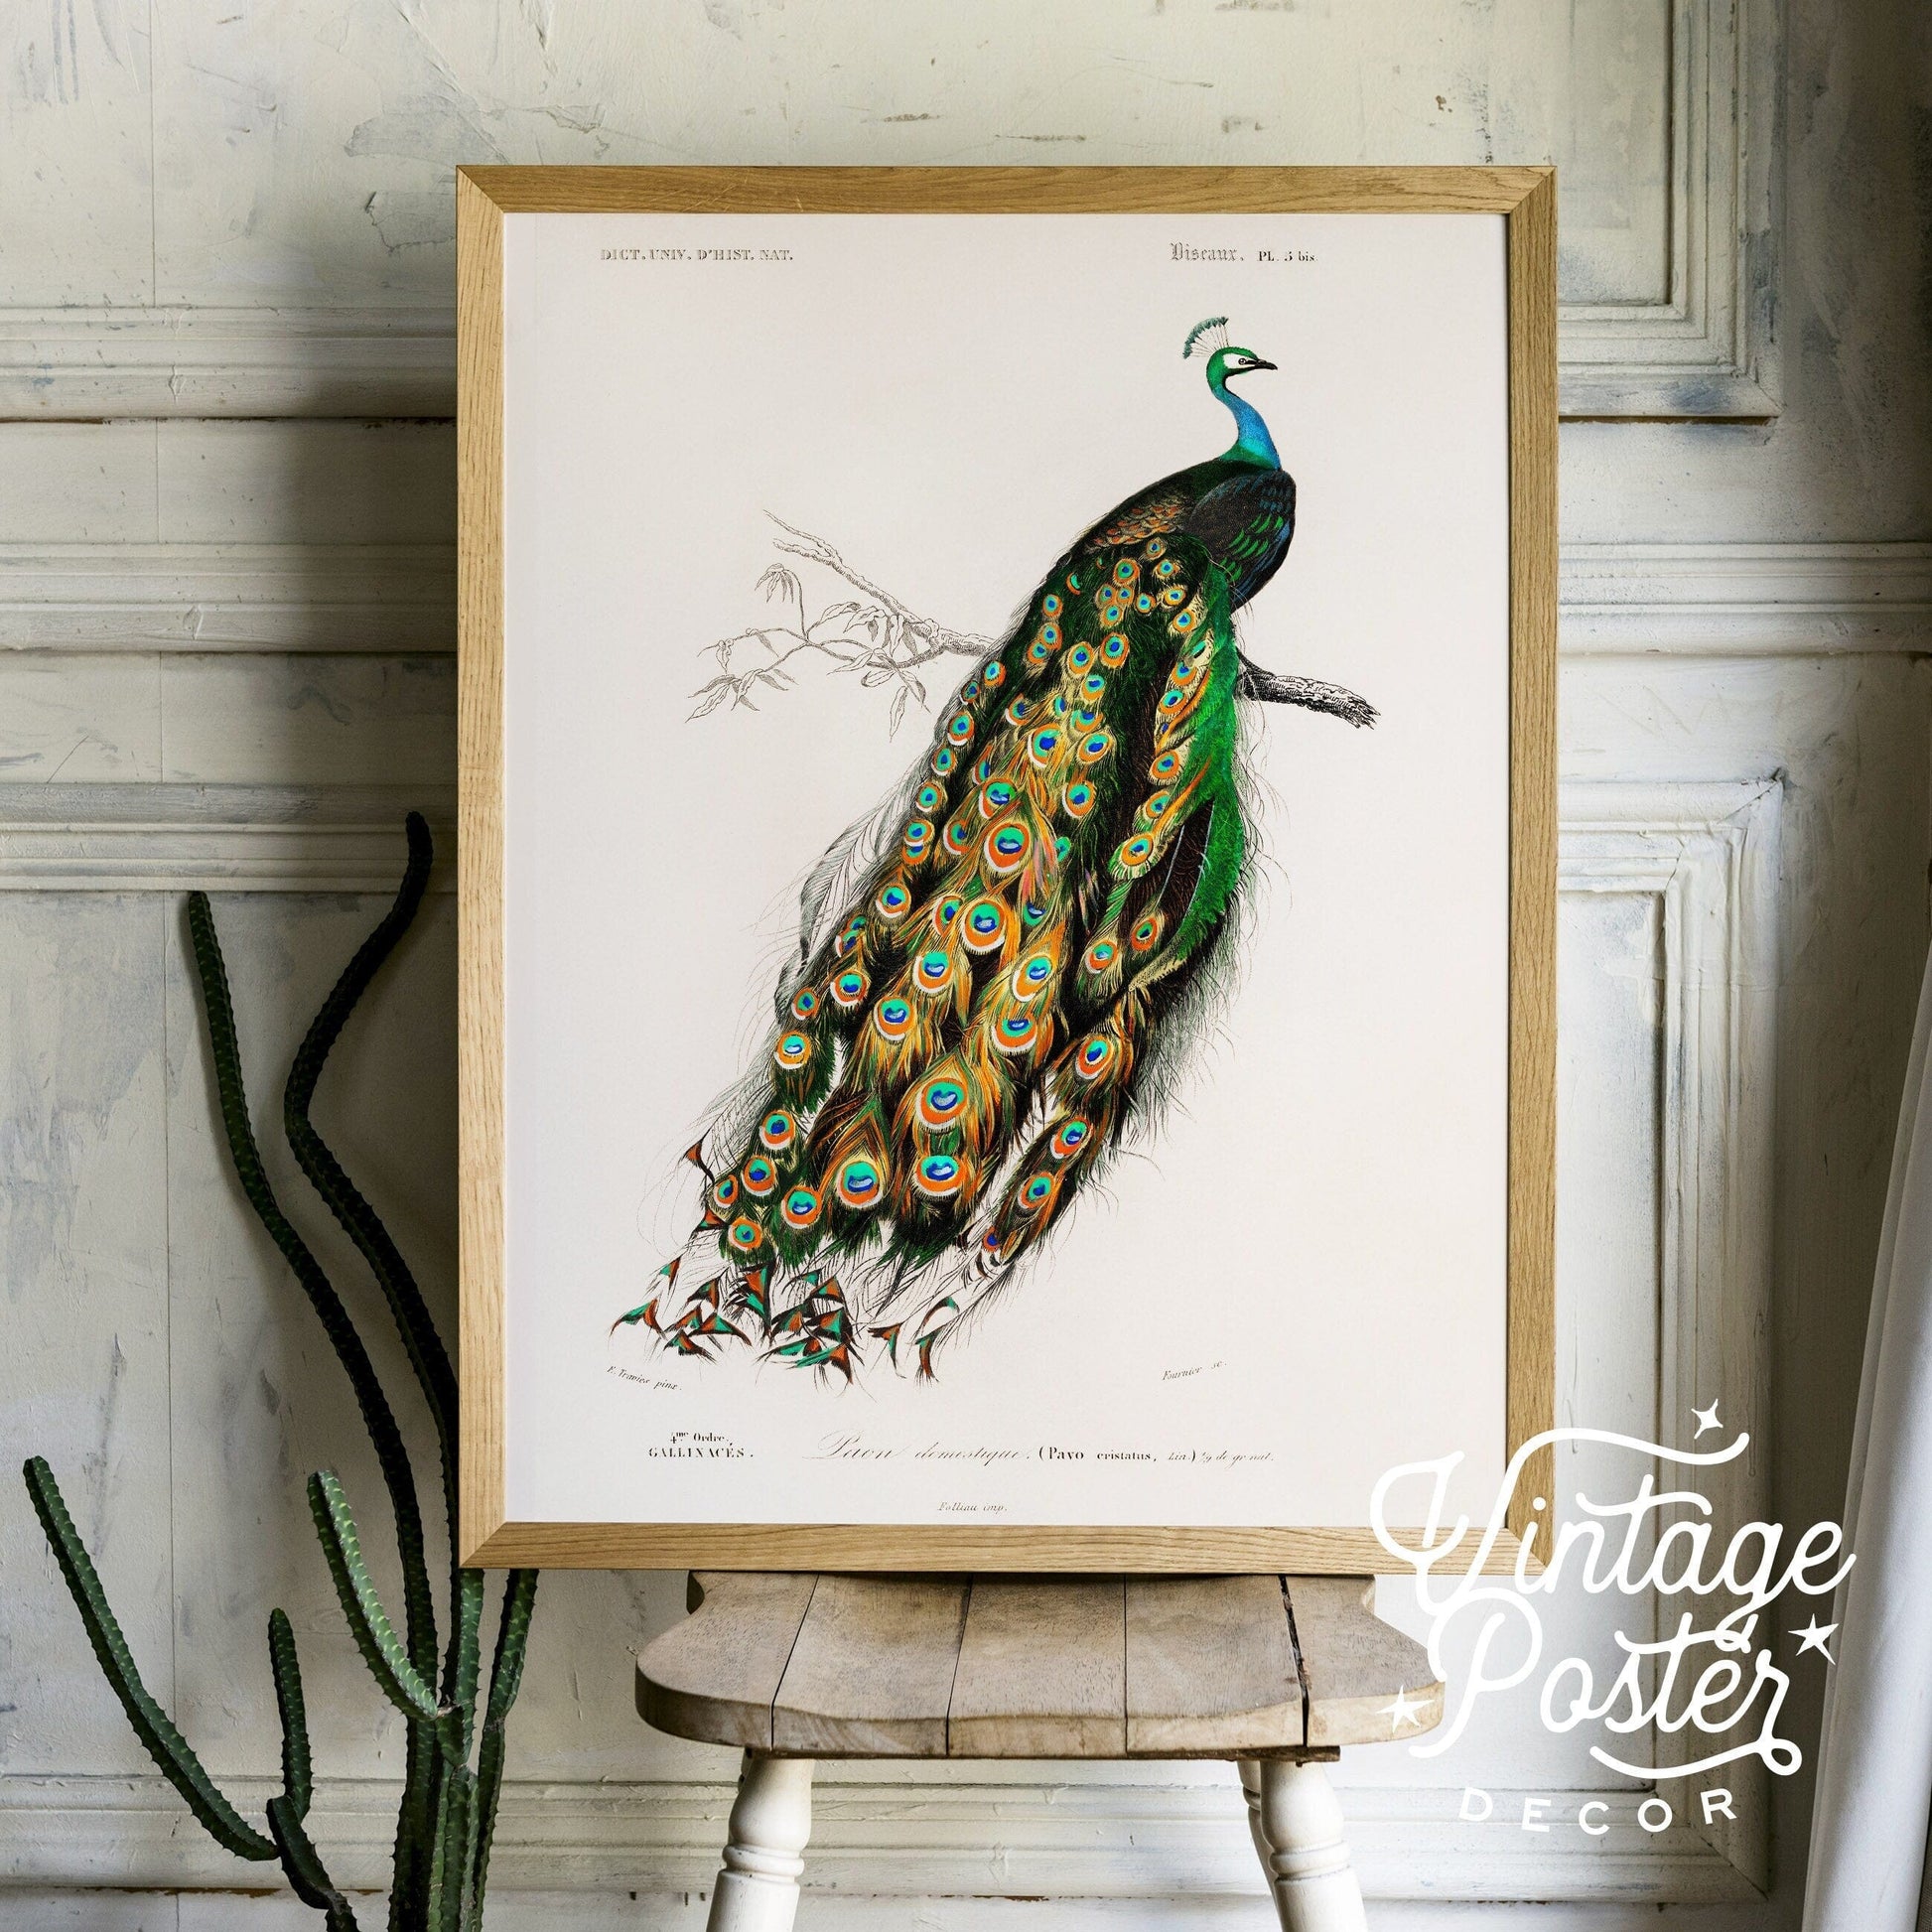 Home Poster Decor Vintage Wall Art, Vintage painting, Vintage Bird, Gift for him, Living room decor, Peacock Print, Cottagecore Decor, Antique Painting